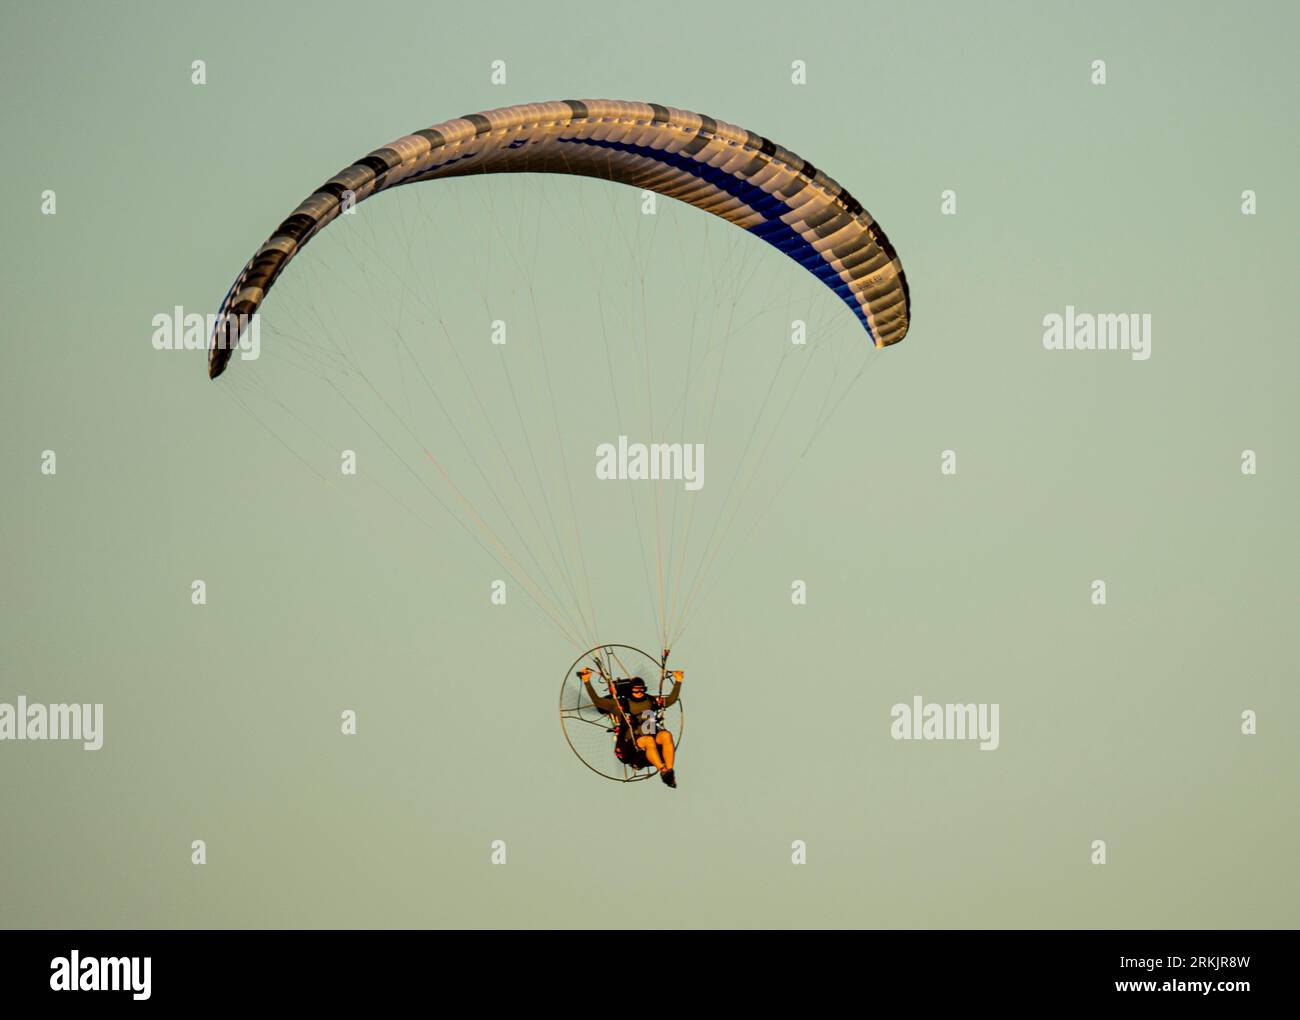 planes, light aircraft, motor gliders, paragliders, sport and adrenaline Stock Photo